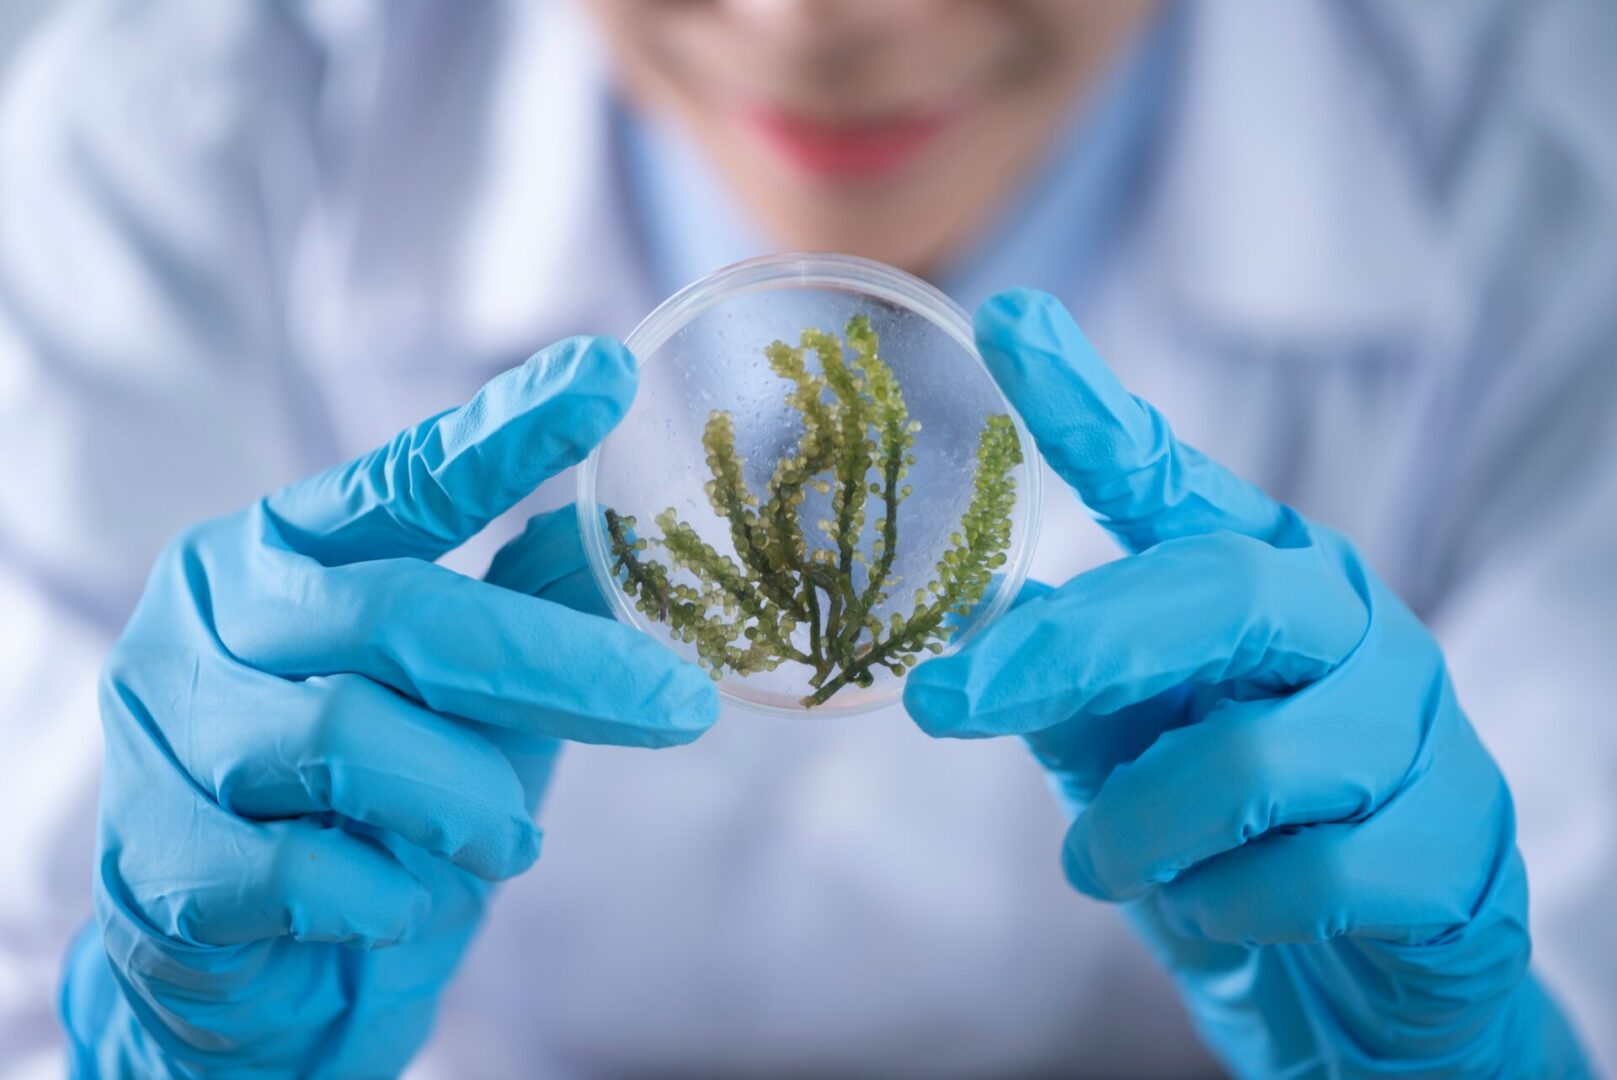 A person holding a plant in a petri dish.